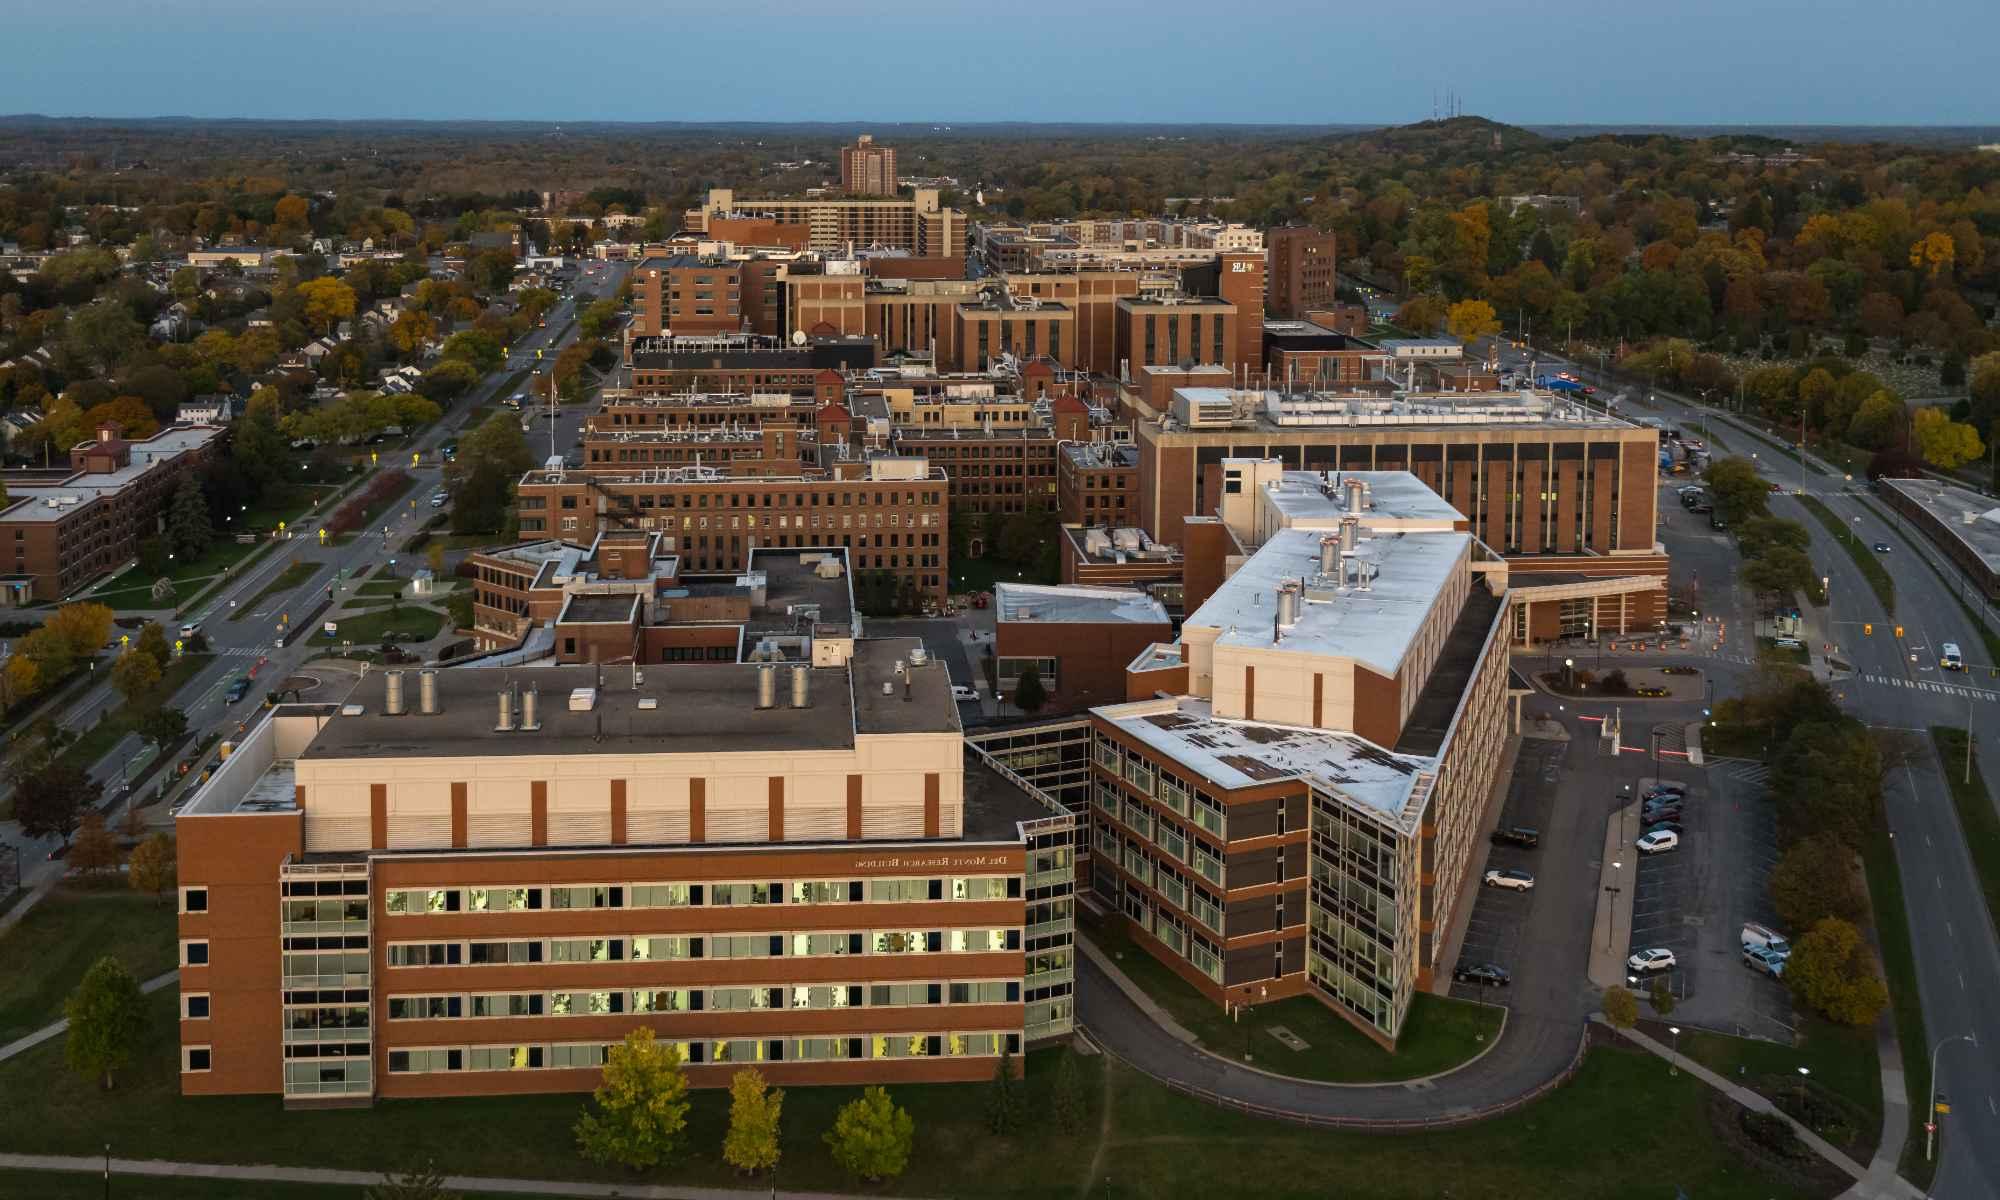 Aerial view of the University of Rochester's Medical Center campus.